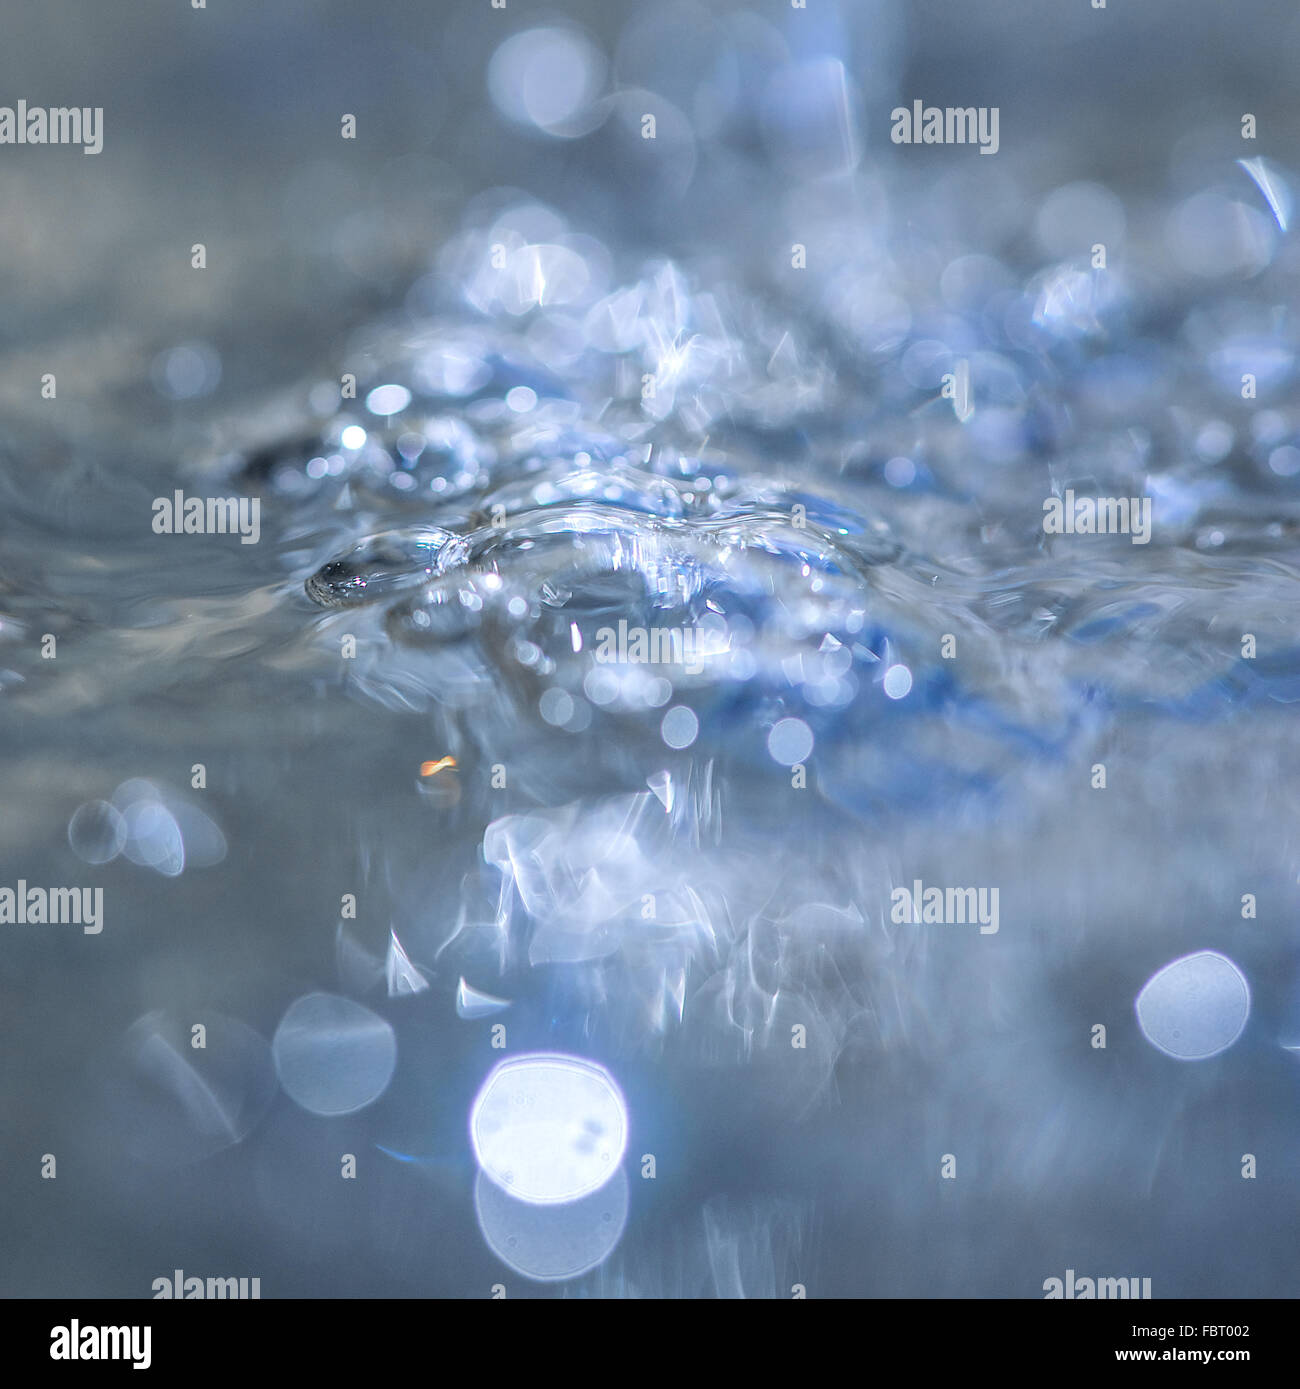 Bubbles on surface of water Stock Photo